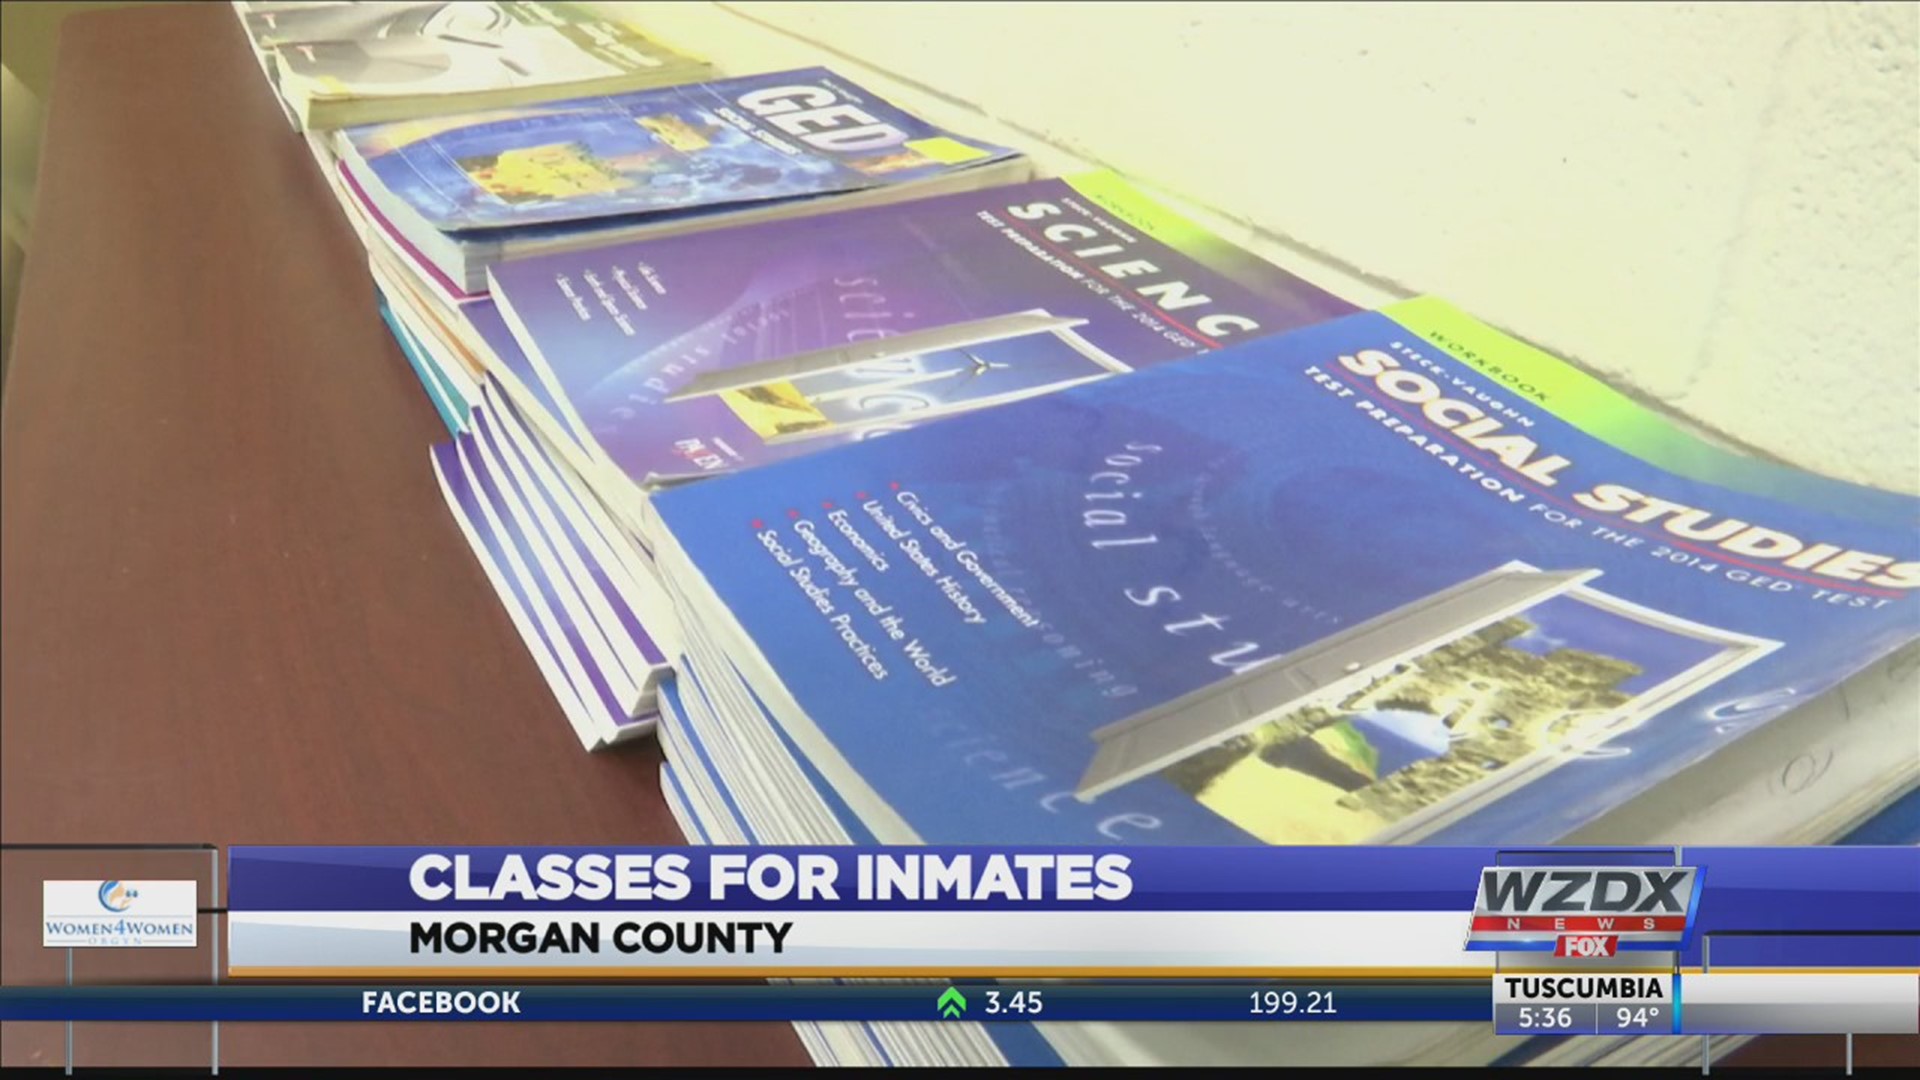 Keeping people from ending up back in jail after they're released is the goal of the Morgan County Sheriff's Office education classes.